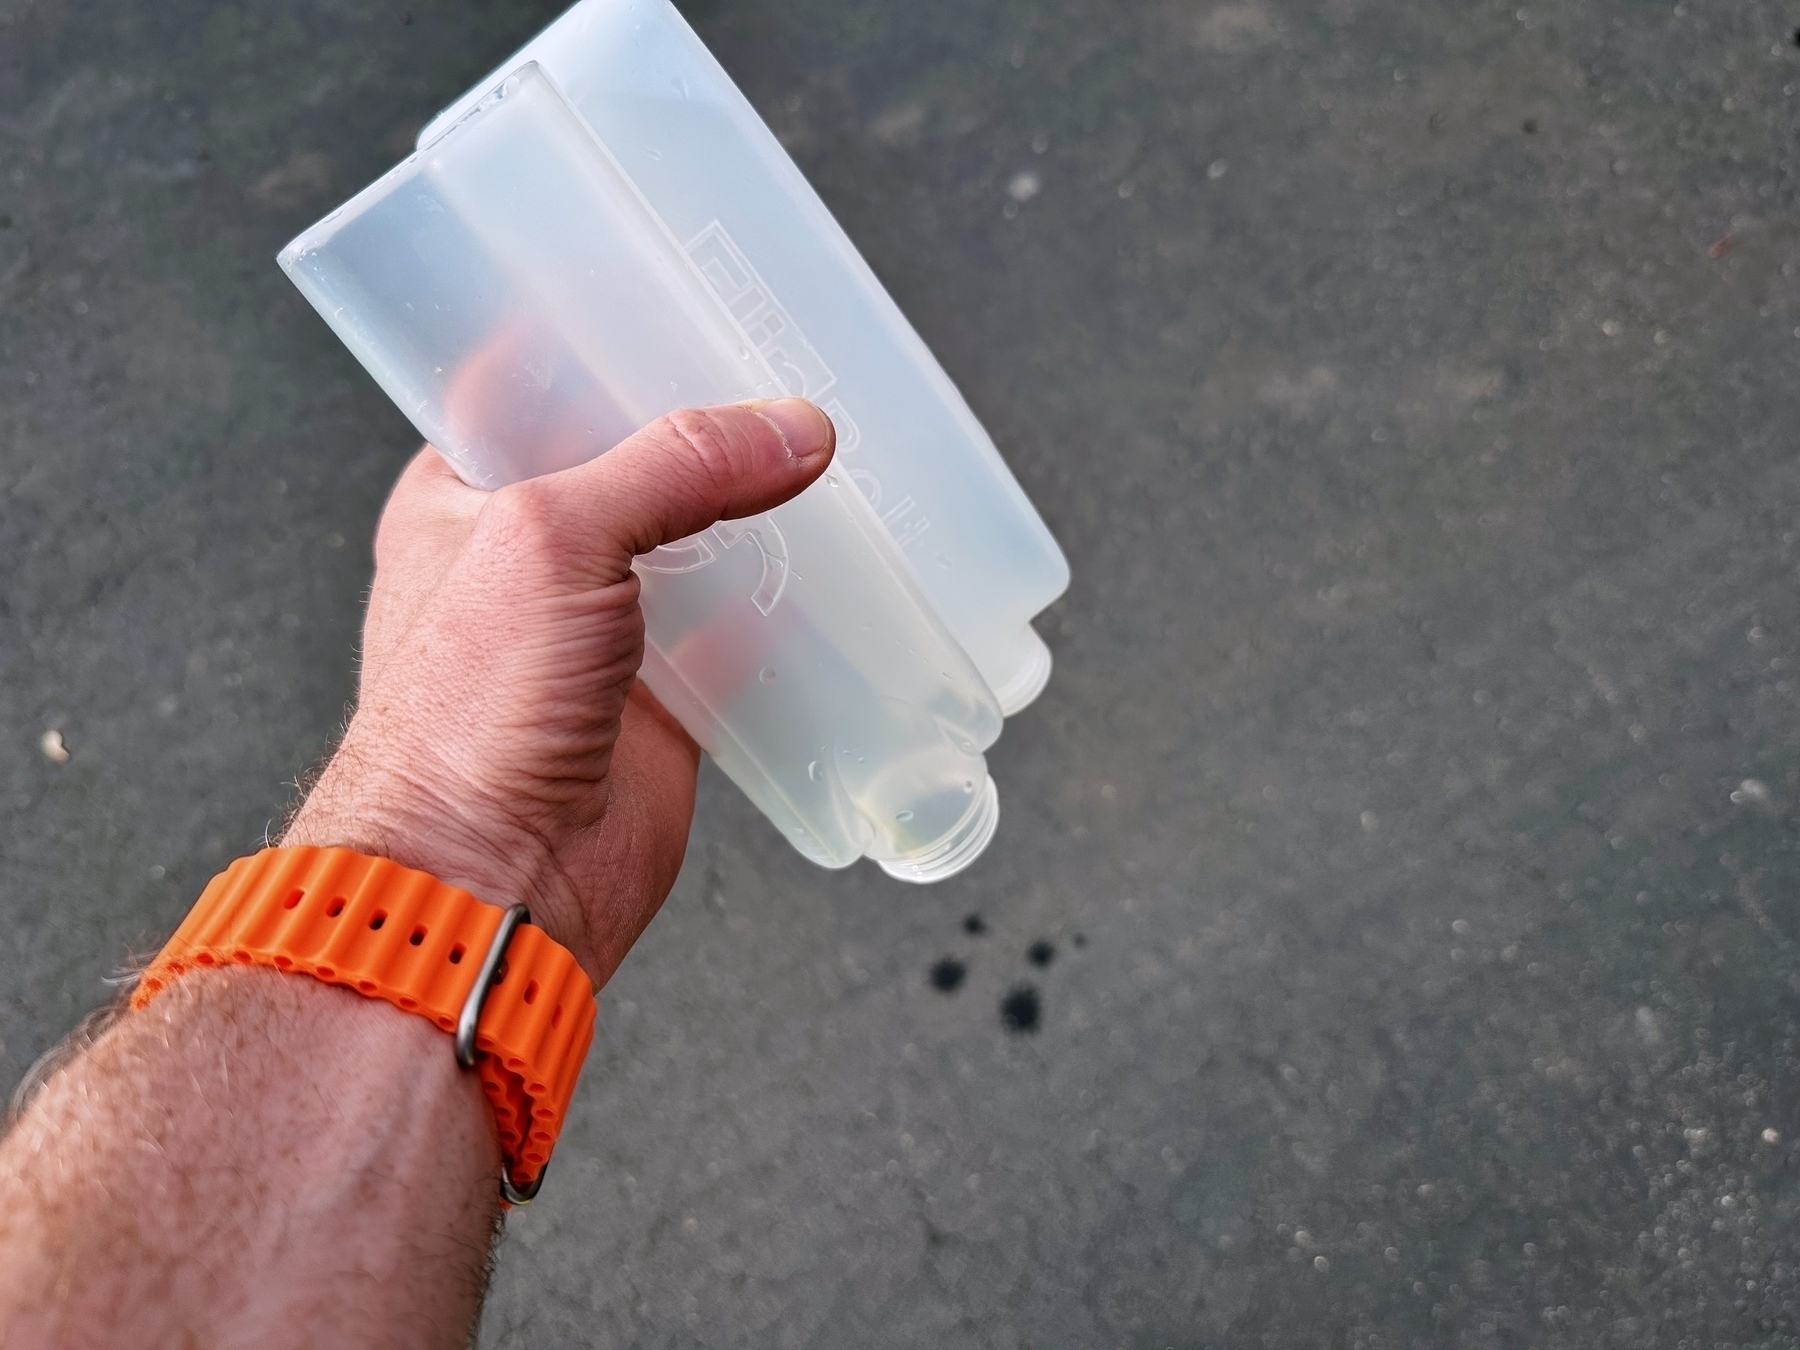 A hand holding an empty, translucent plastic bottle over a paved surface. The wrist is adorned with an orange watch strap.